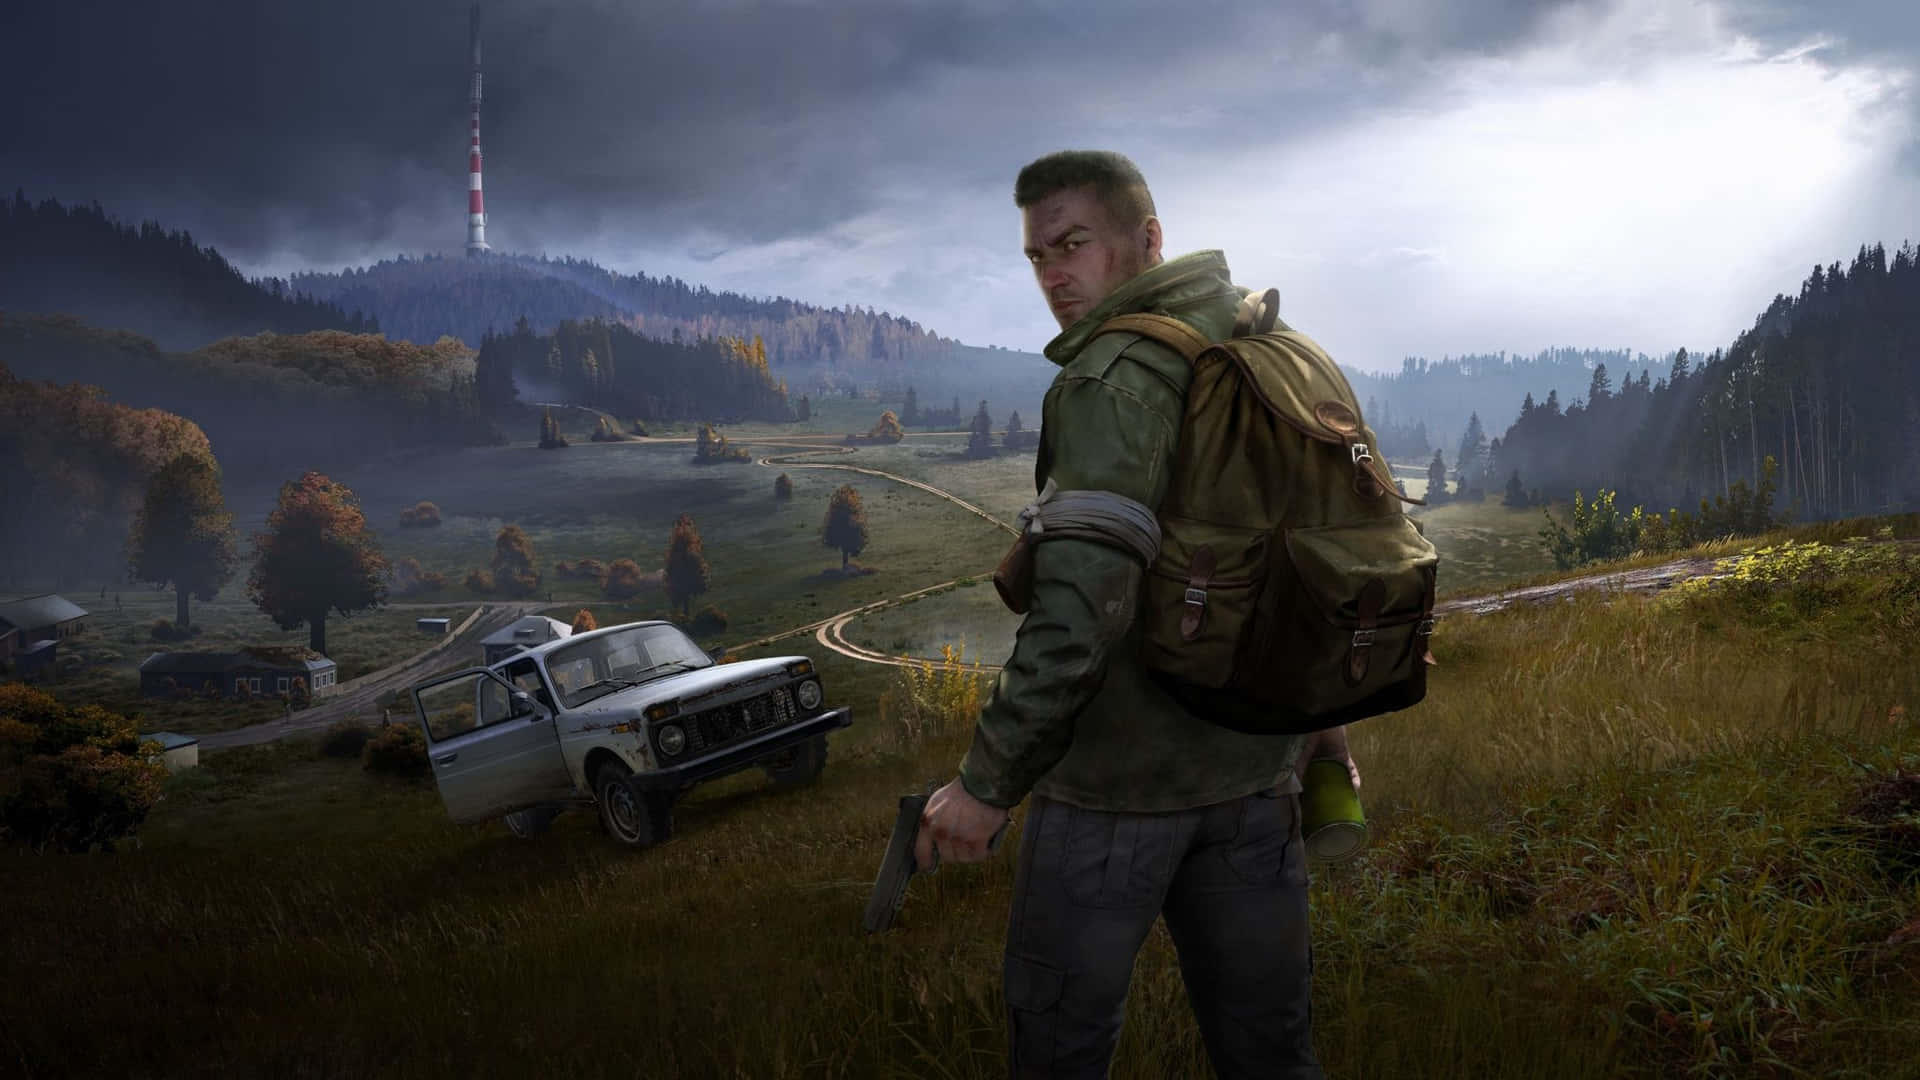 Explore the world of Dayz Epoch with a realistic and immersive mod